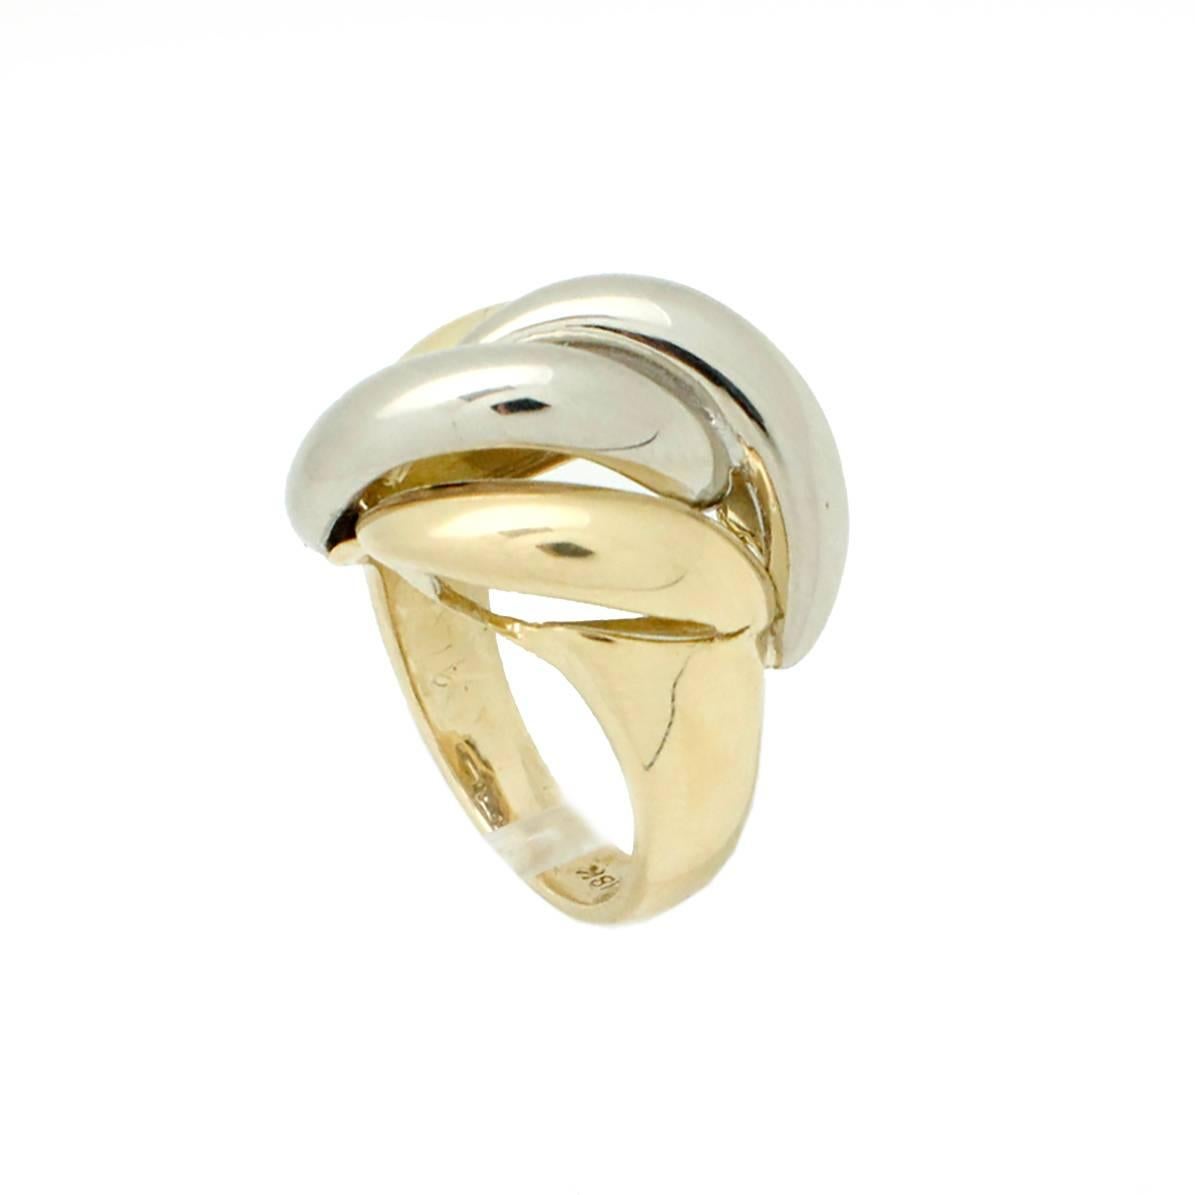 Tiffany & Co. Two Tone 18kt Gold Swirling Motif Ring In Excellent Condition For Sale In Scottsdale, AZ